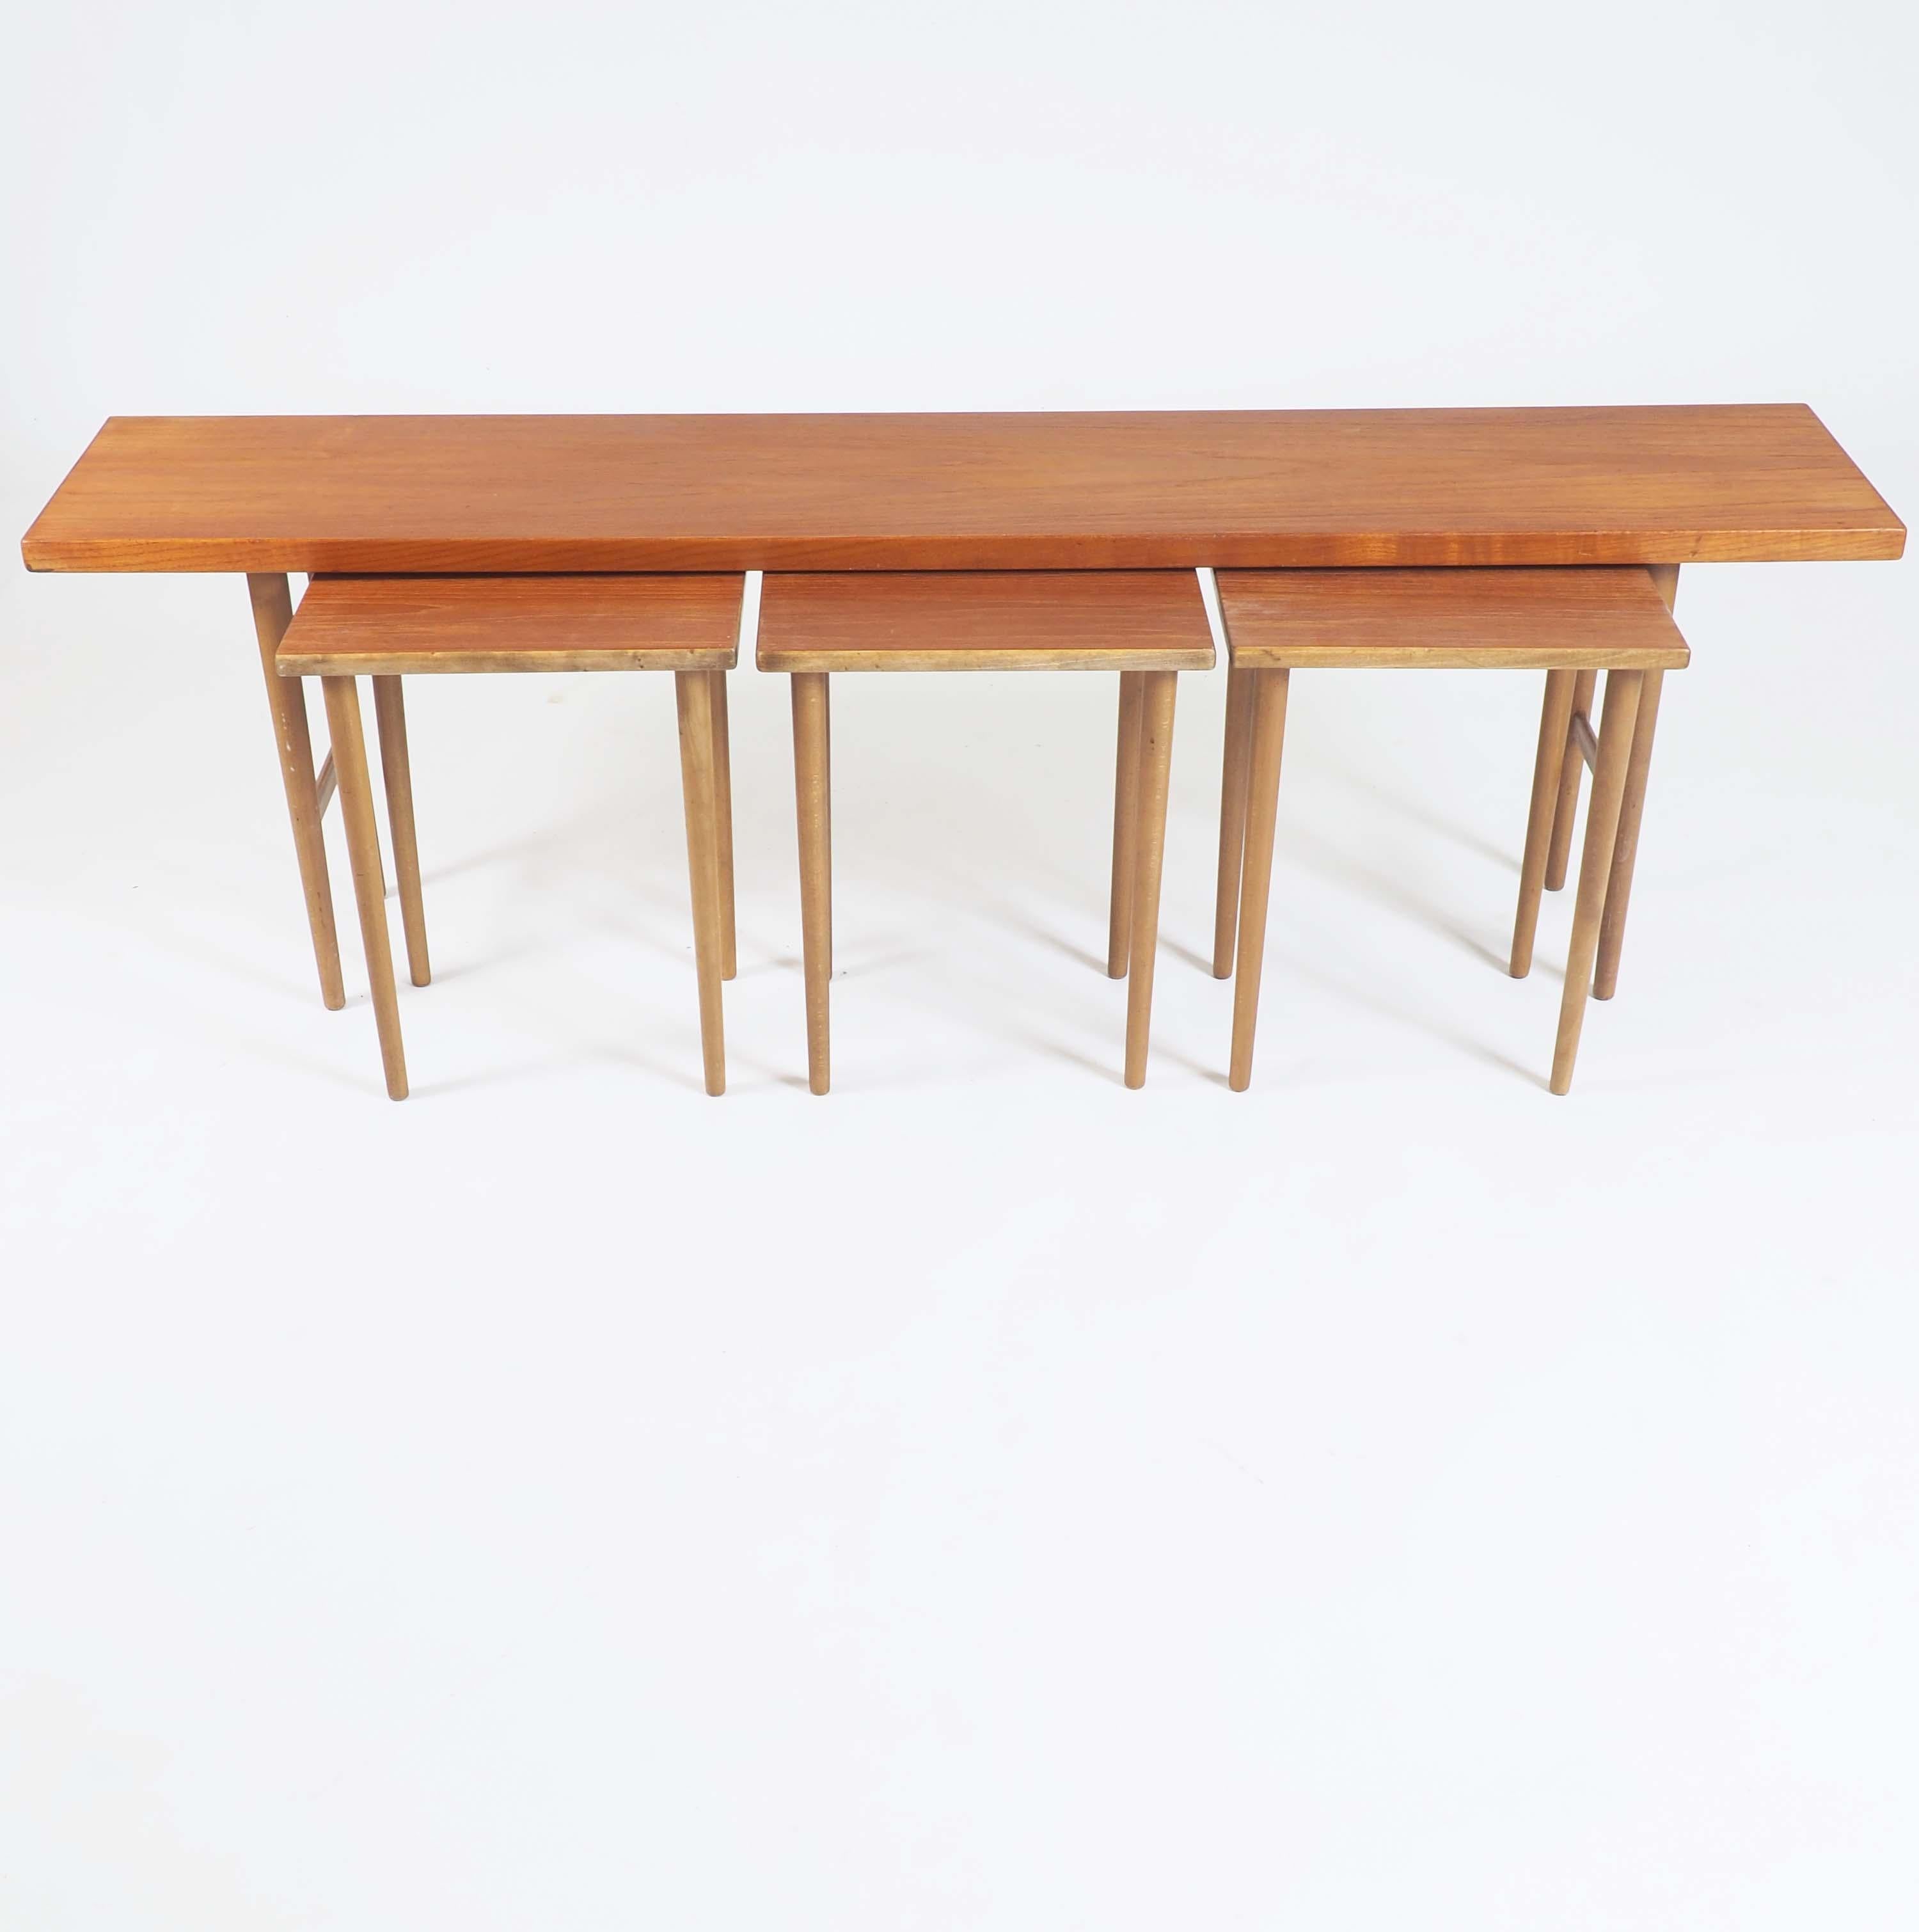 These nesting tables were designed by Kurt Østervig in 1956 and produced by Jason Møbler in Ringsted, Denmark. The model is called model 200 and they are made of teak with legs in beechwood.
They can be used in many ways. As a sideboard, as side